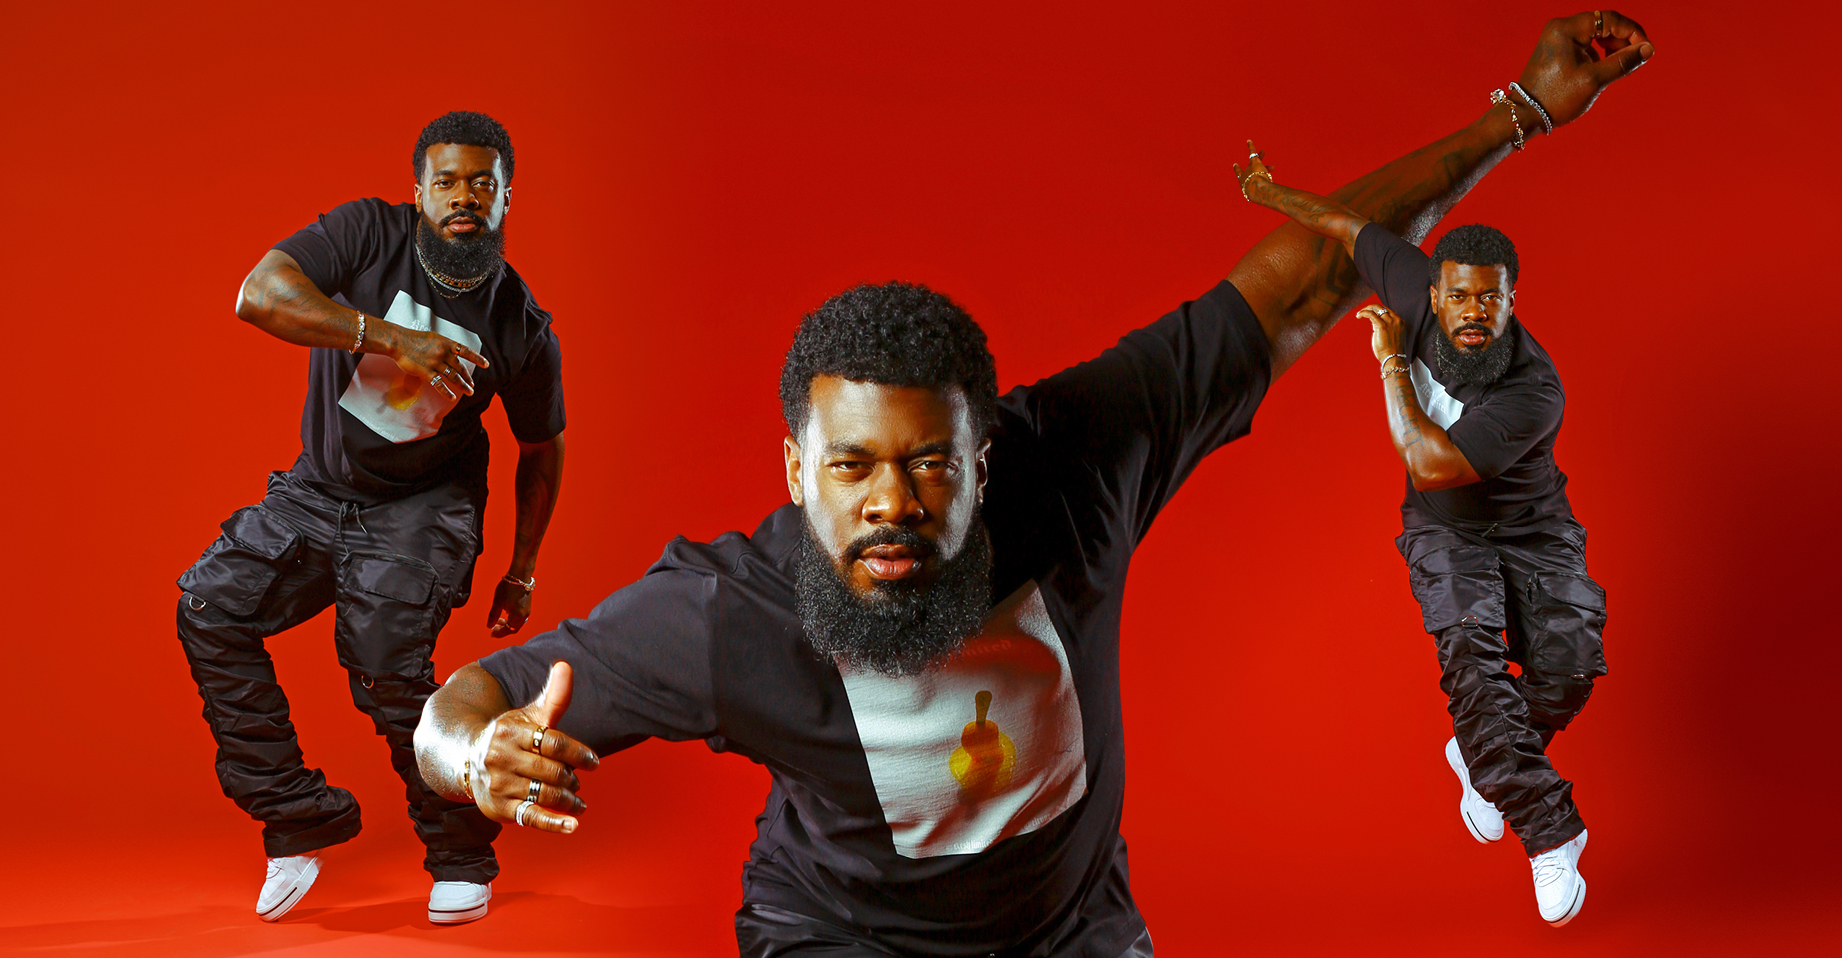 Three photos of JaQuel Knight dancing on a red background. He looks straight into the camera in each pose